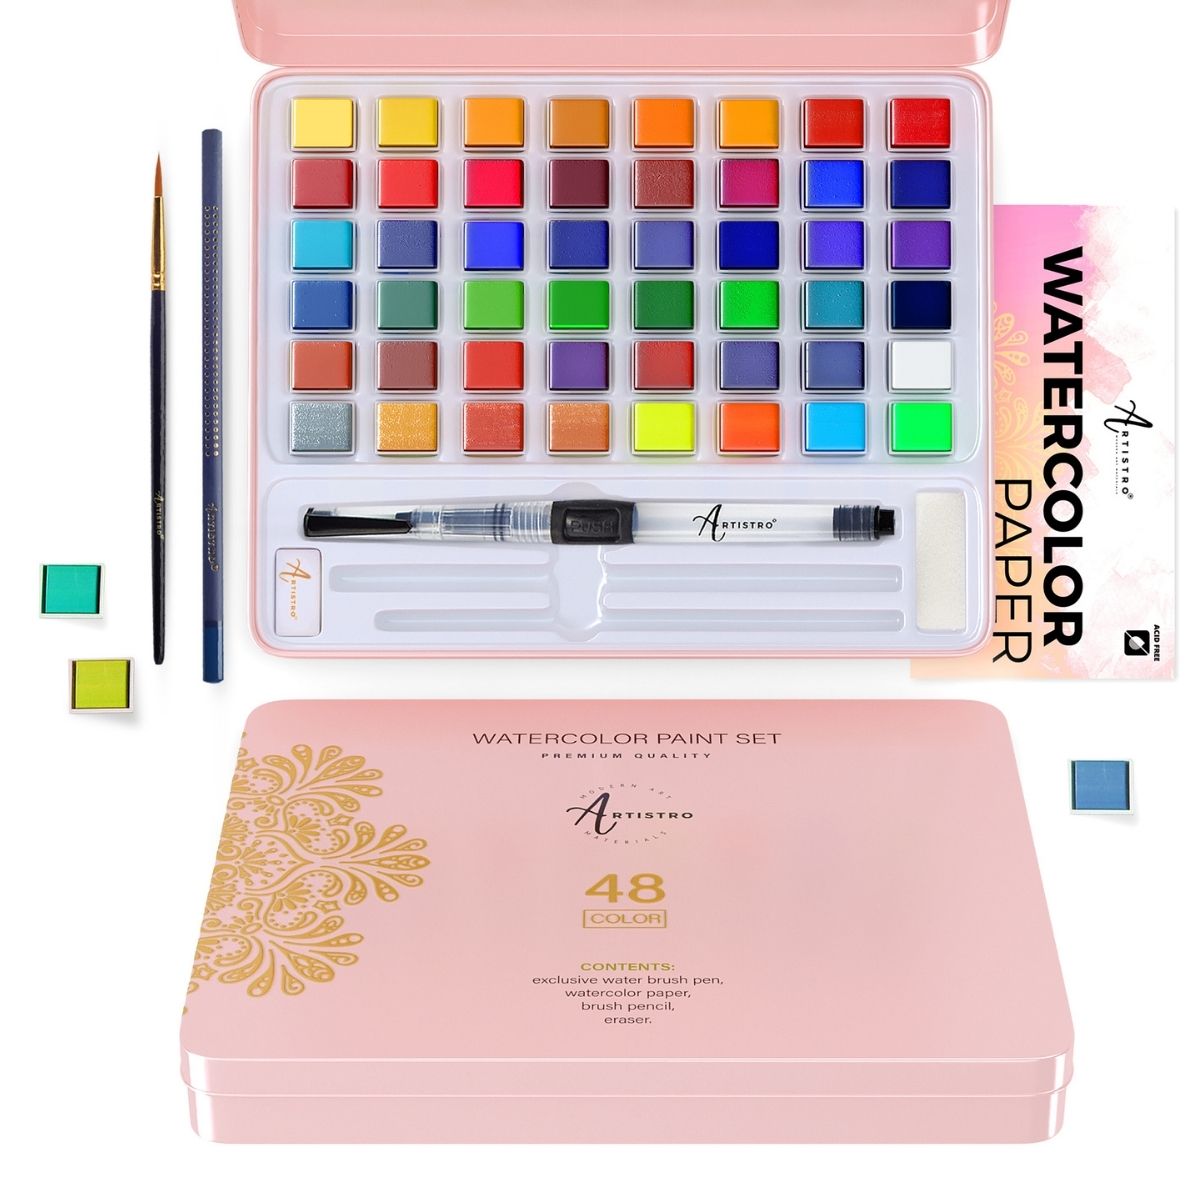 Professional Watercolor Paint Set-24 Vibrant Pans in Pocket Box with Metal  Ring and Watercolor Brush, Portable Artist Travel Tin & Mixing Palette